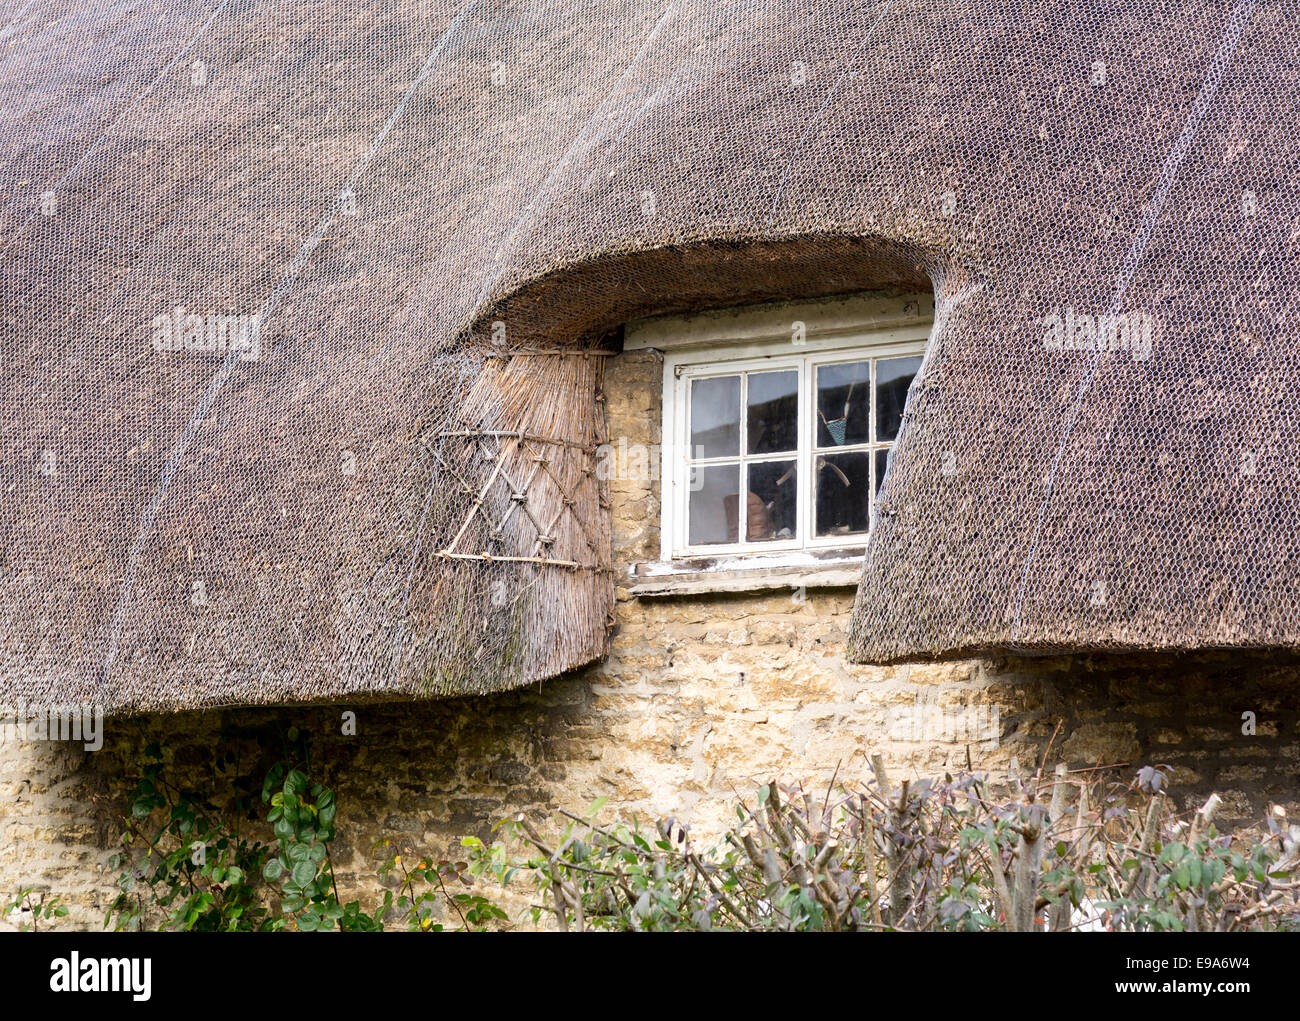 Small wooden window under thatched roof Stock Photo